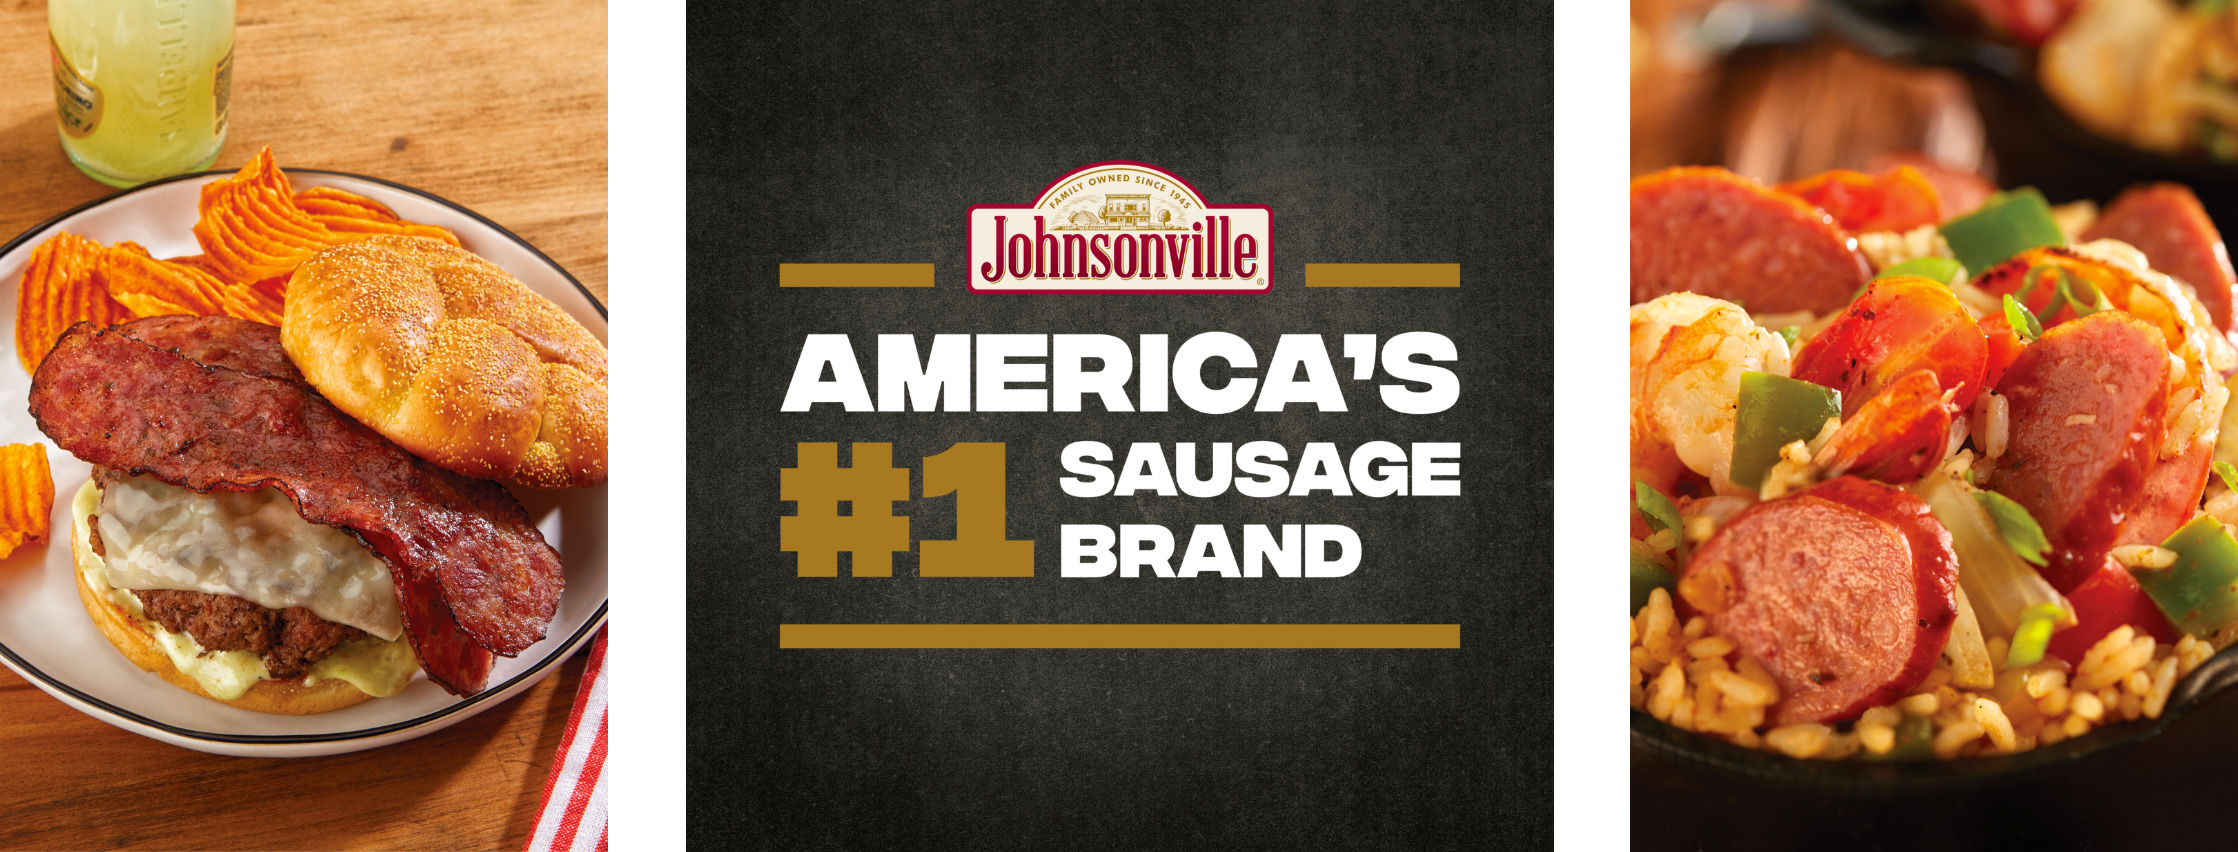 Creative Energy -  Johnsonville  Trade Show Graphics & Roller Grill Video